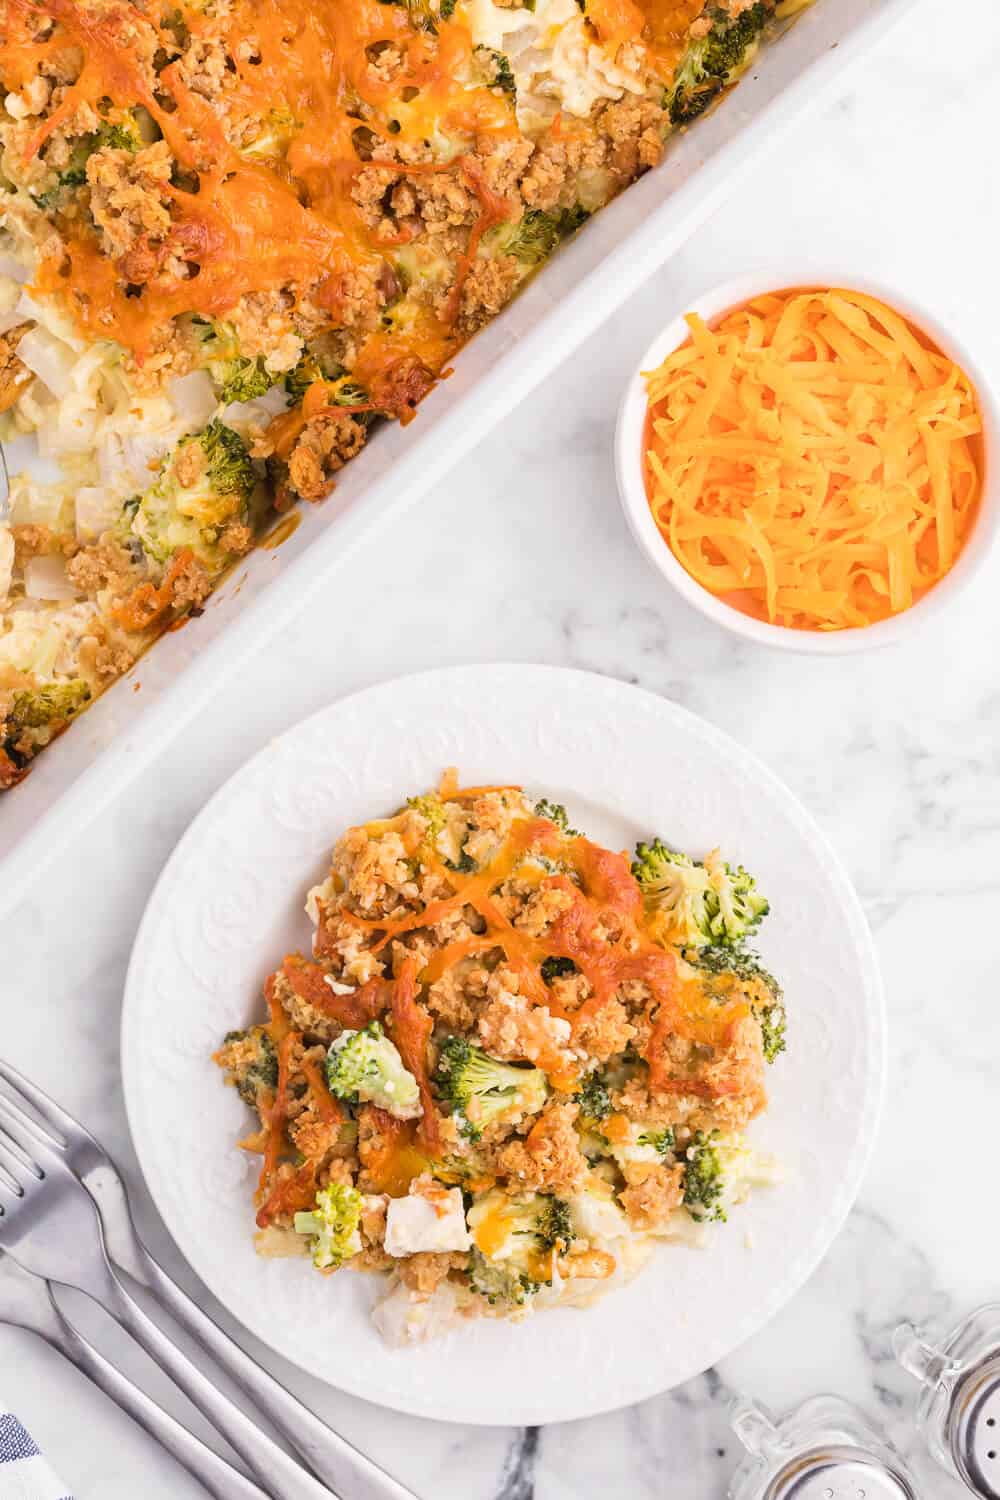 Chicken and Broccoli Casserole - This casserole is a great way to use leftover chicken. Combined with the broccoli and cheese, it is a family-pleasing main dish, served along side a salad.